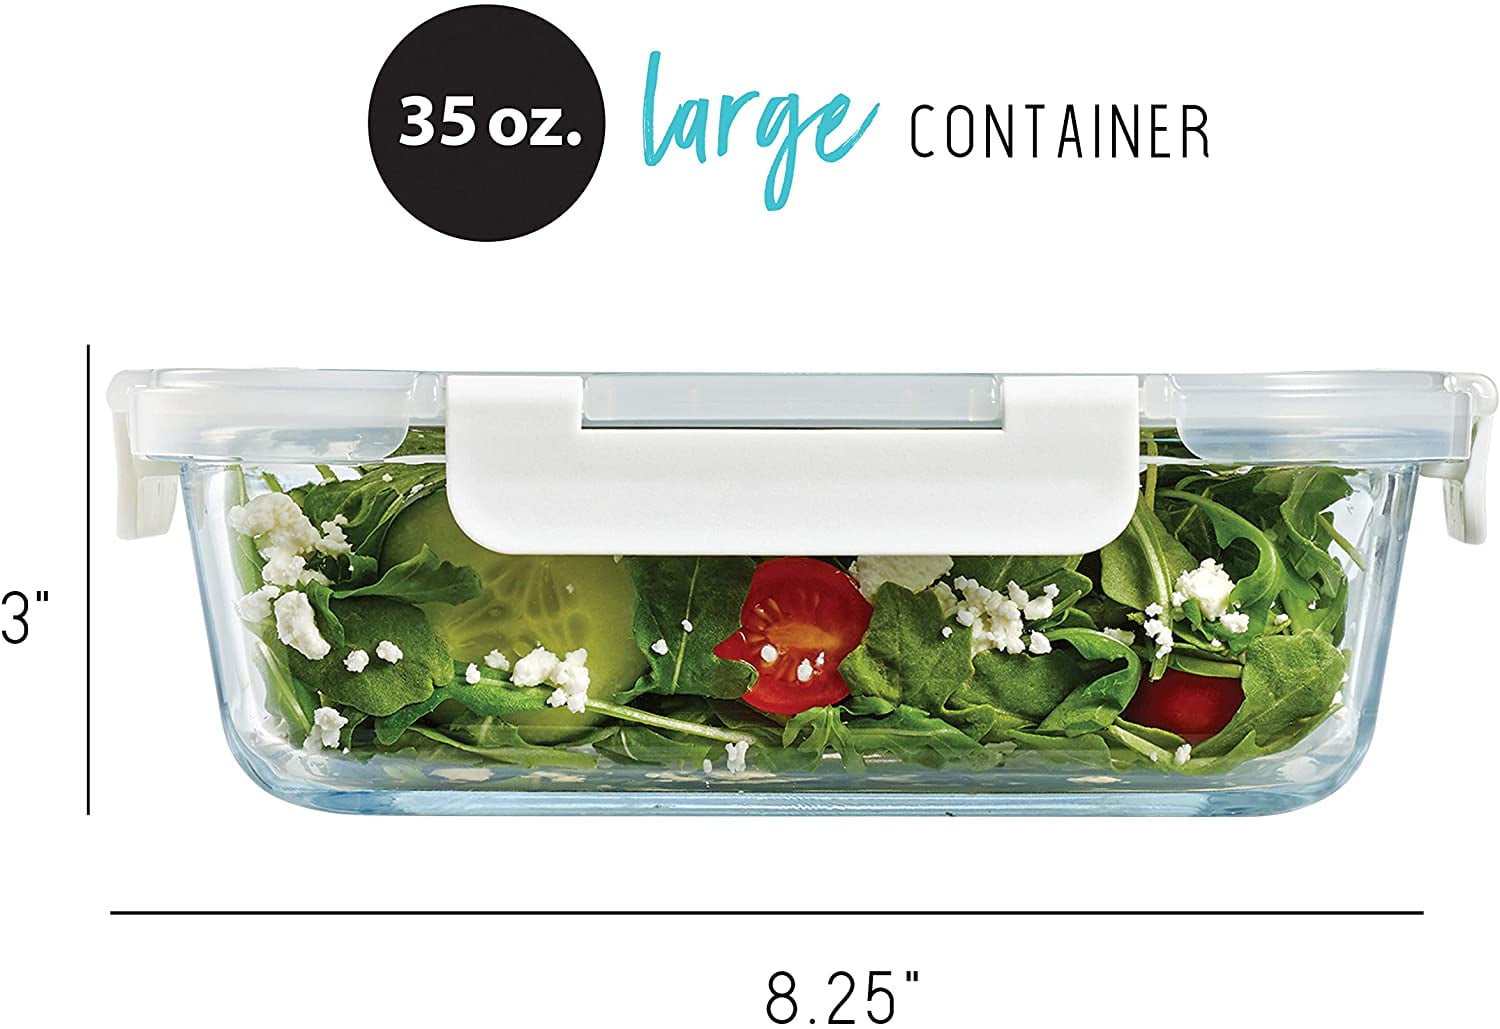 Fit & Fresh Dishwasher Safe Food Storage Containers